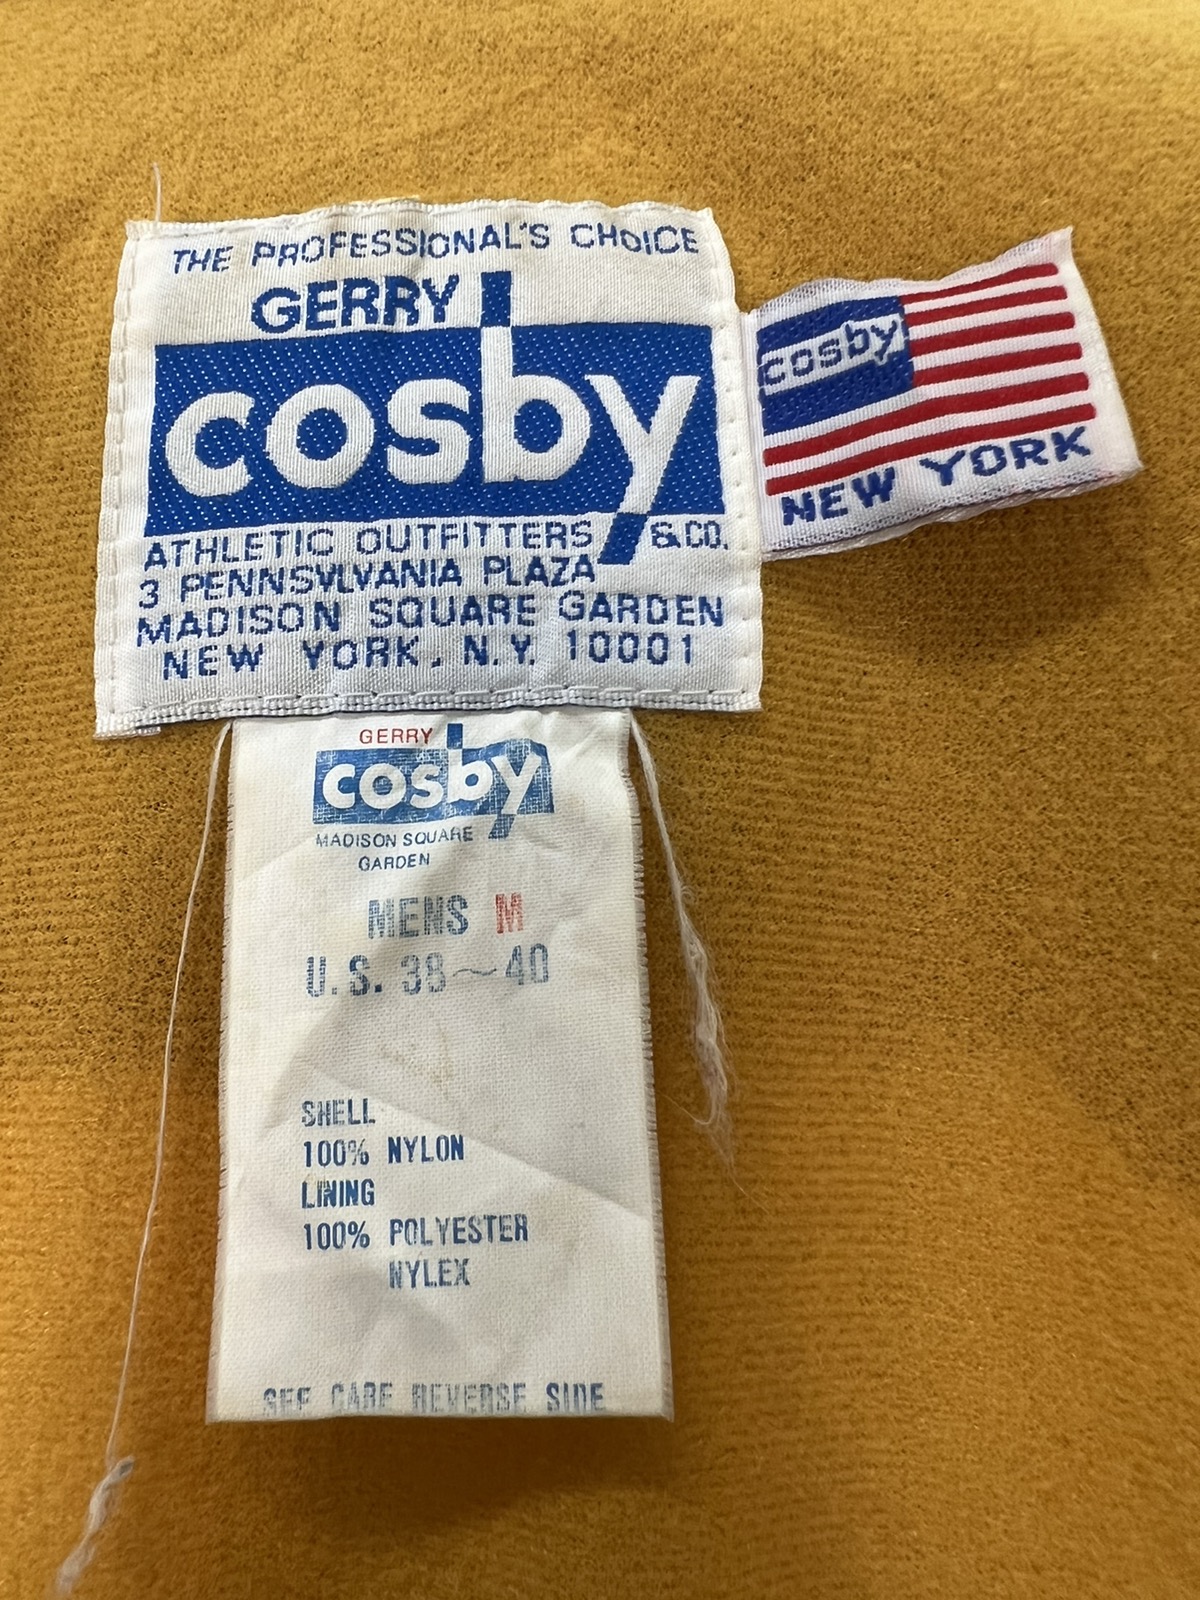 Other Designers Vintage - Gerry Cosby New York City Coach Jacket